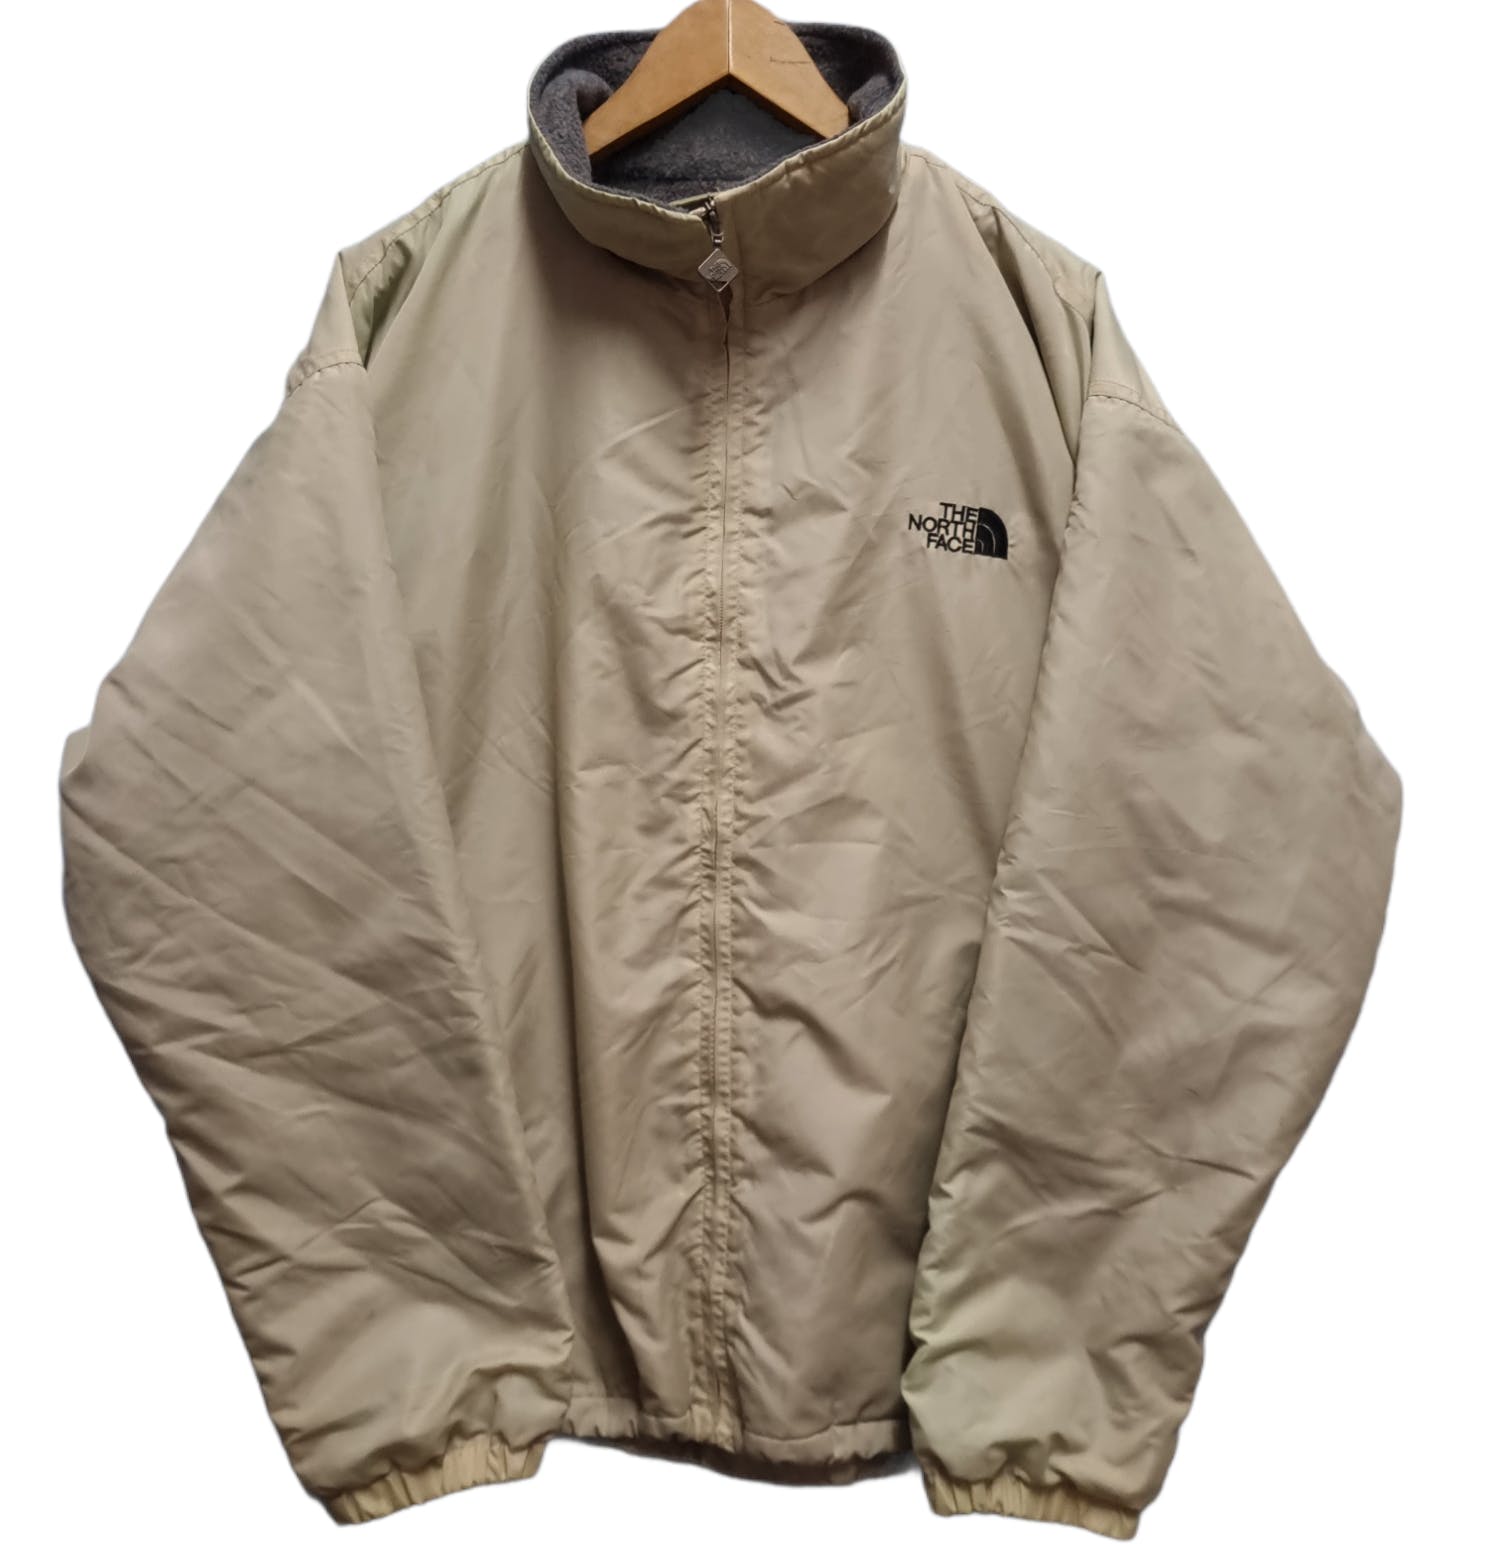 🔥 SALE🔥The North Face Zipper Jacket - 1